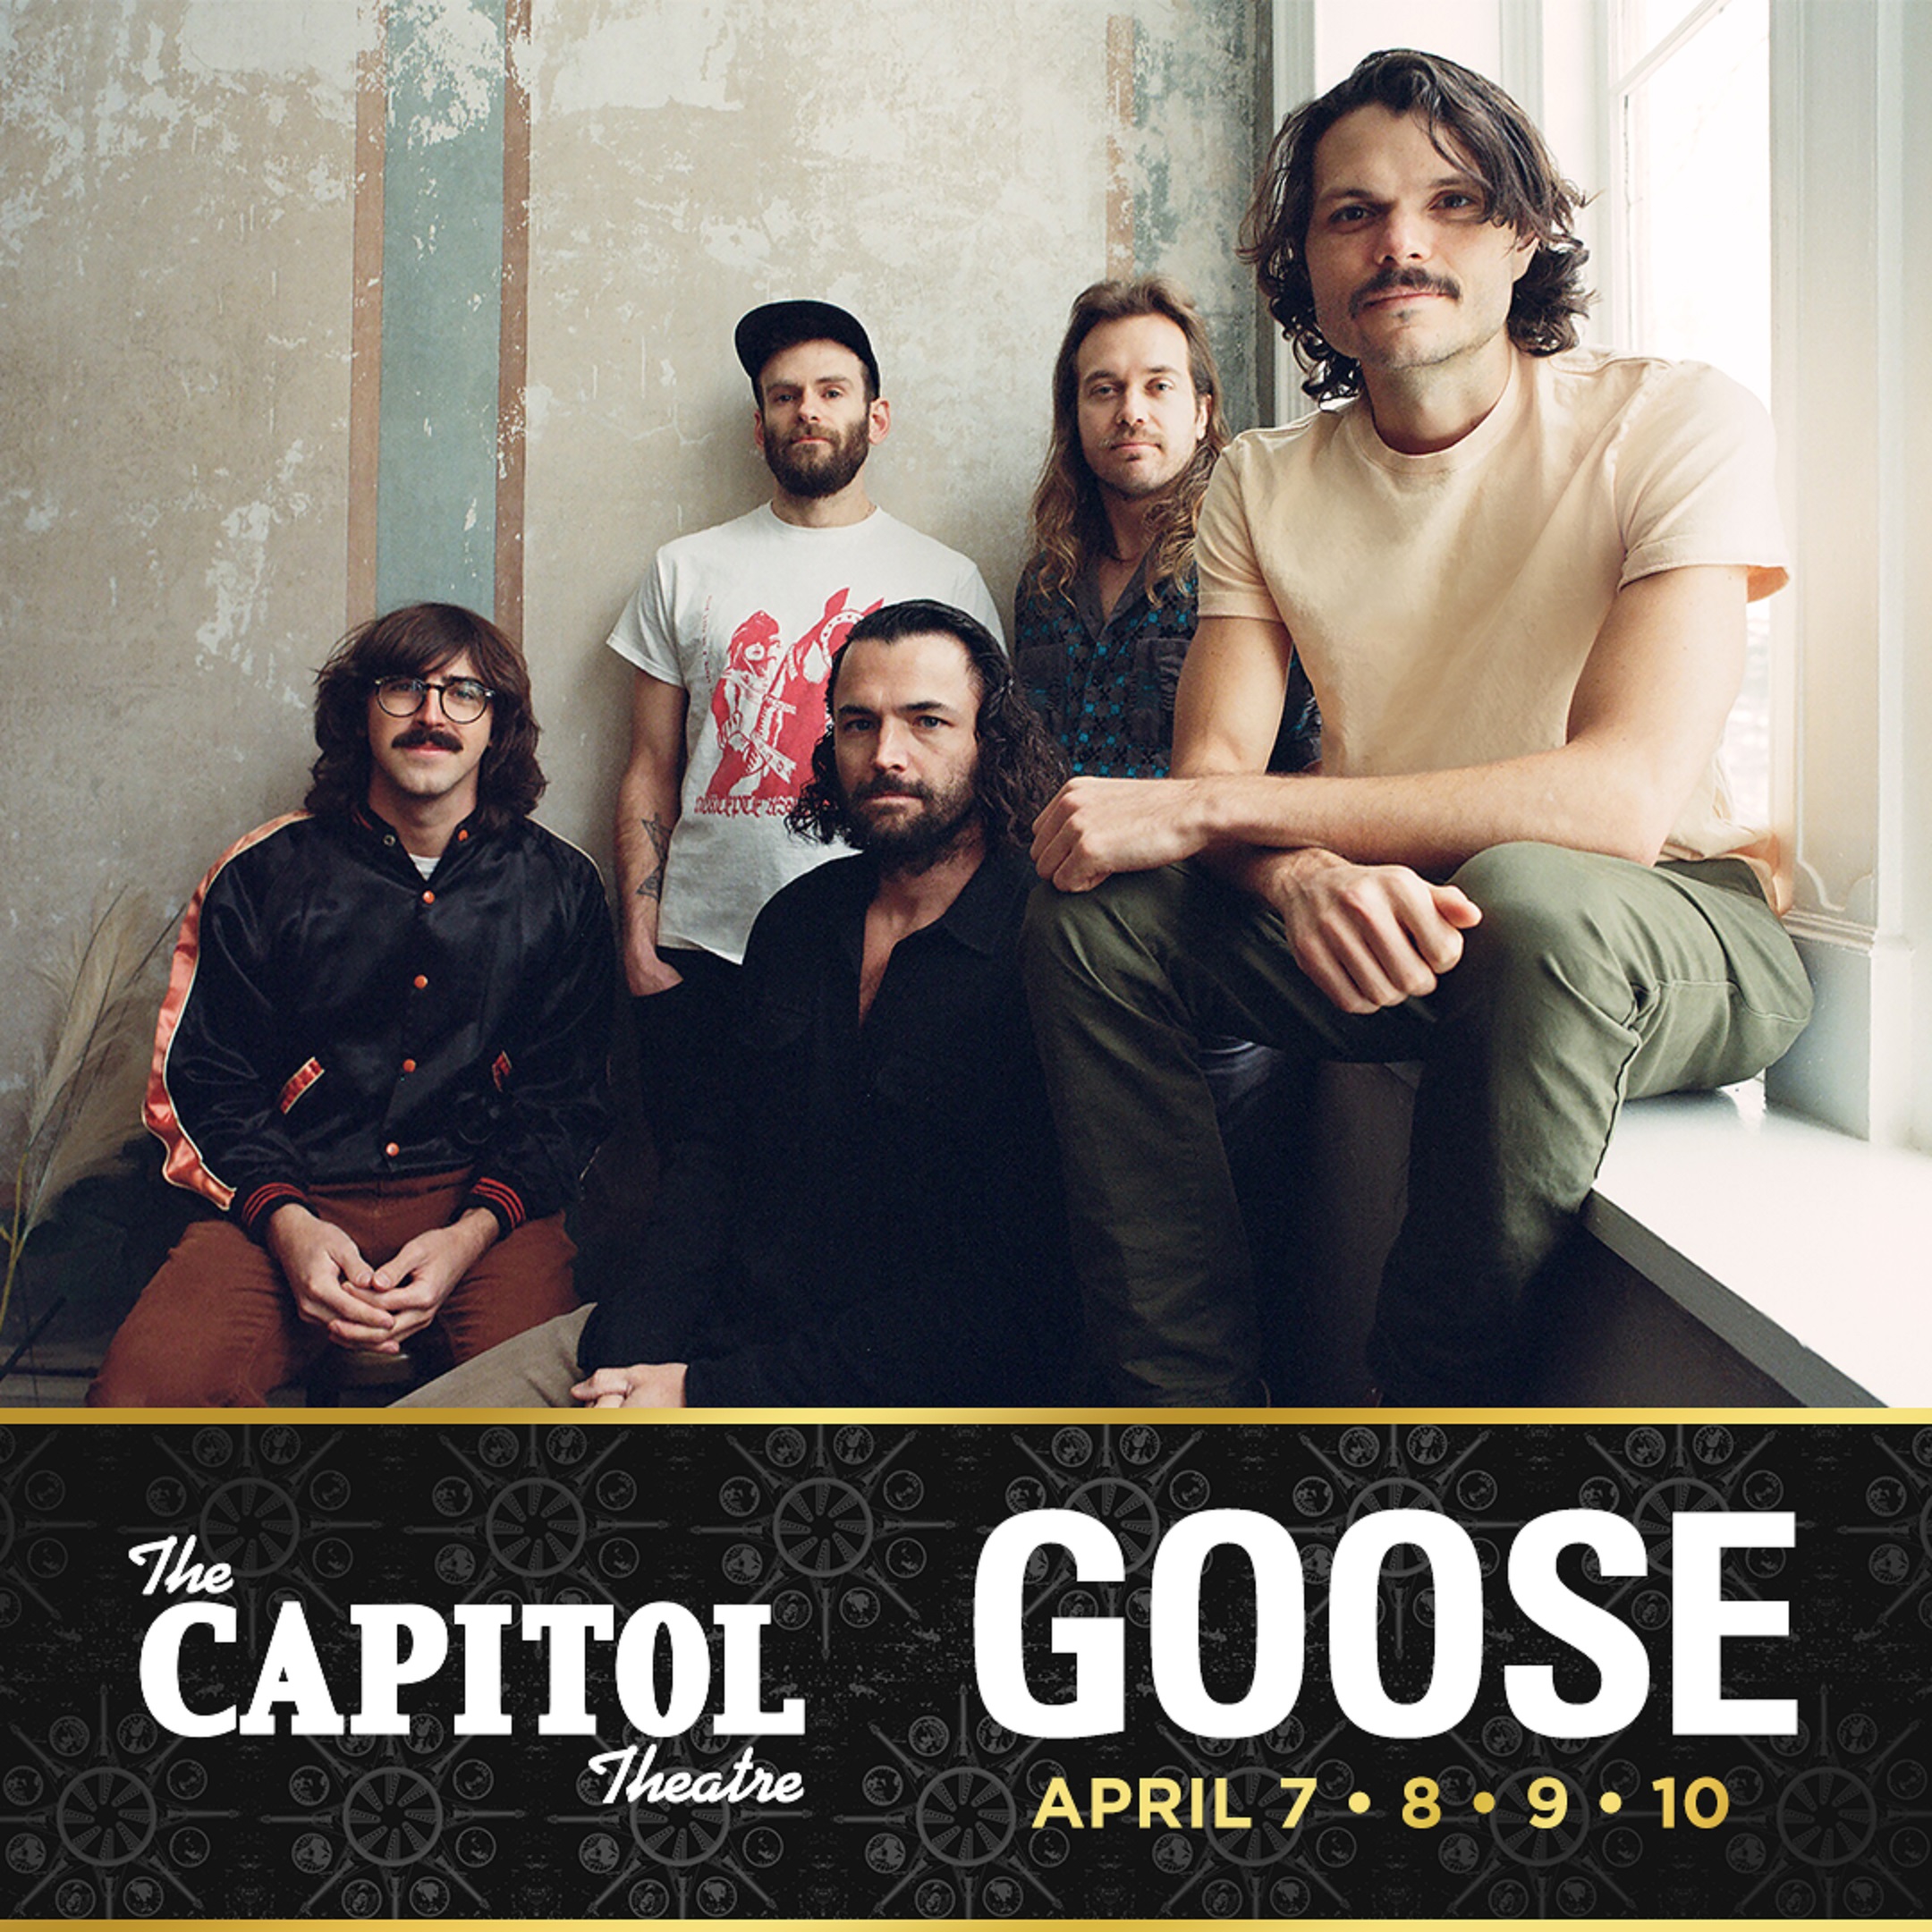 GOOSE ANNOUNCE FOUR-SHOW RUN AT THE CAPITOL THEATRE APRIL 7-10